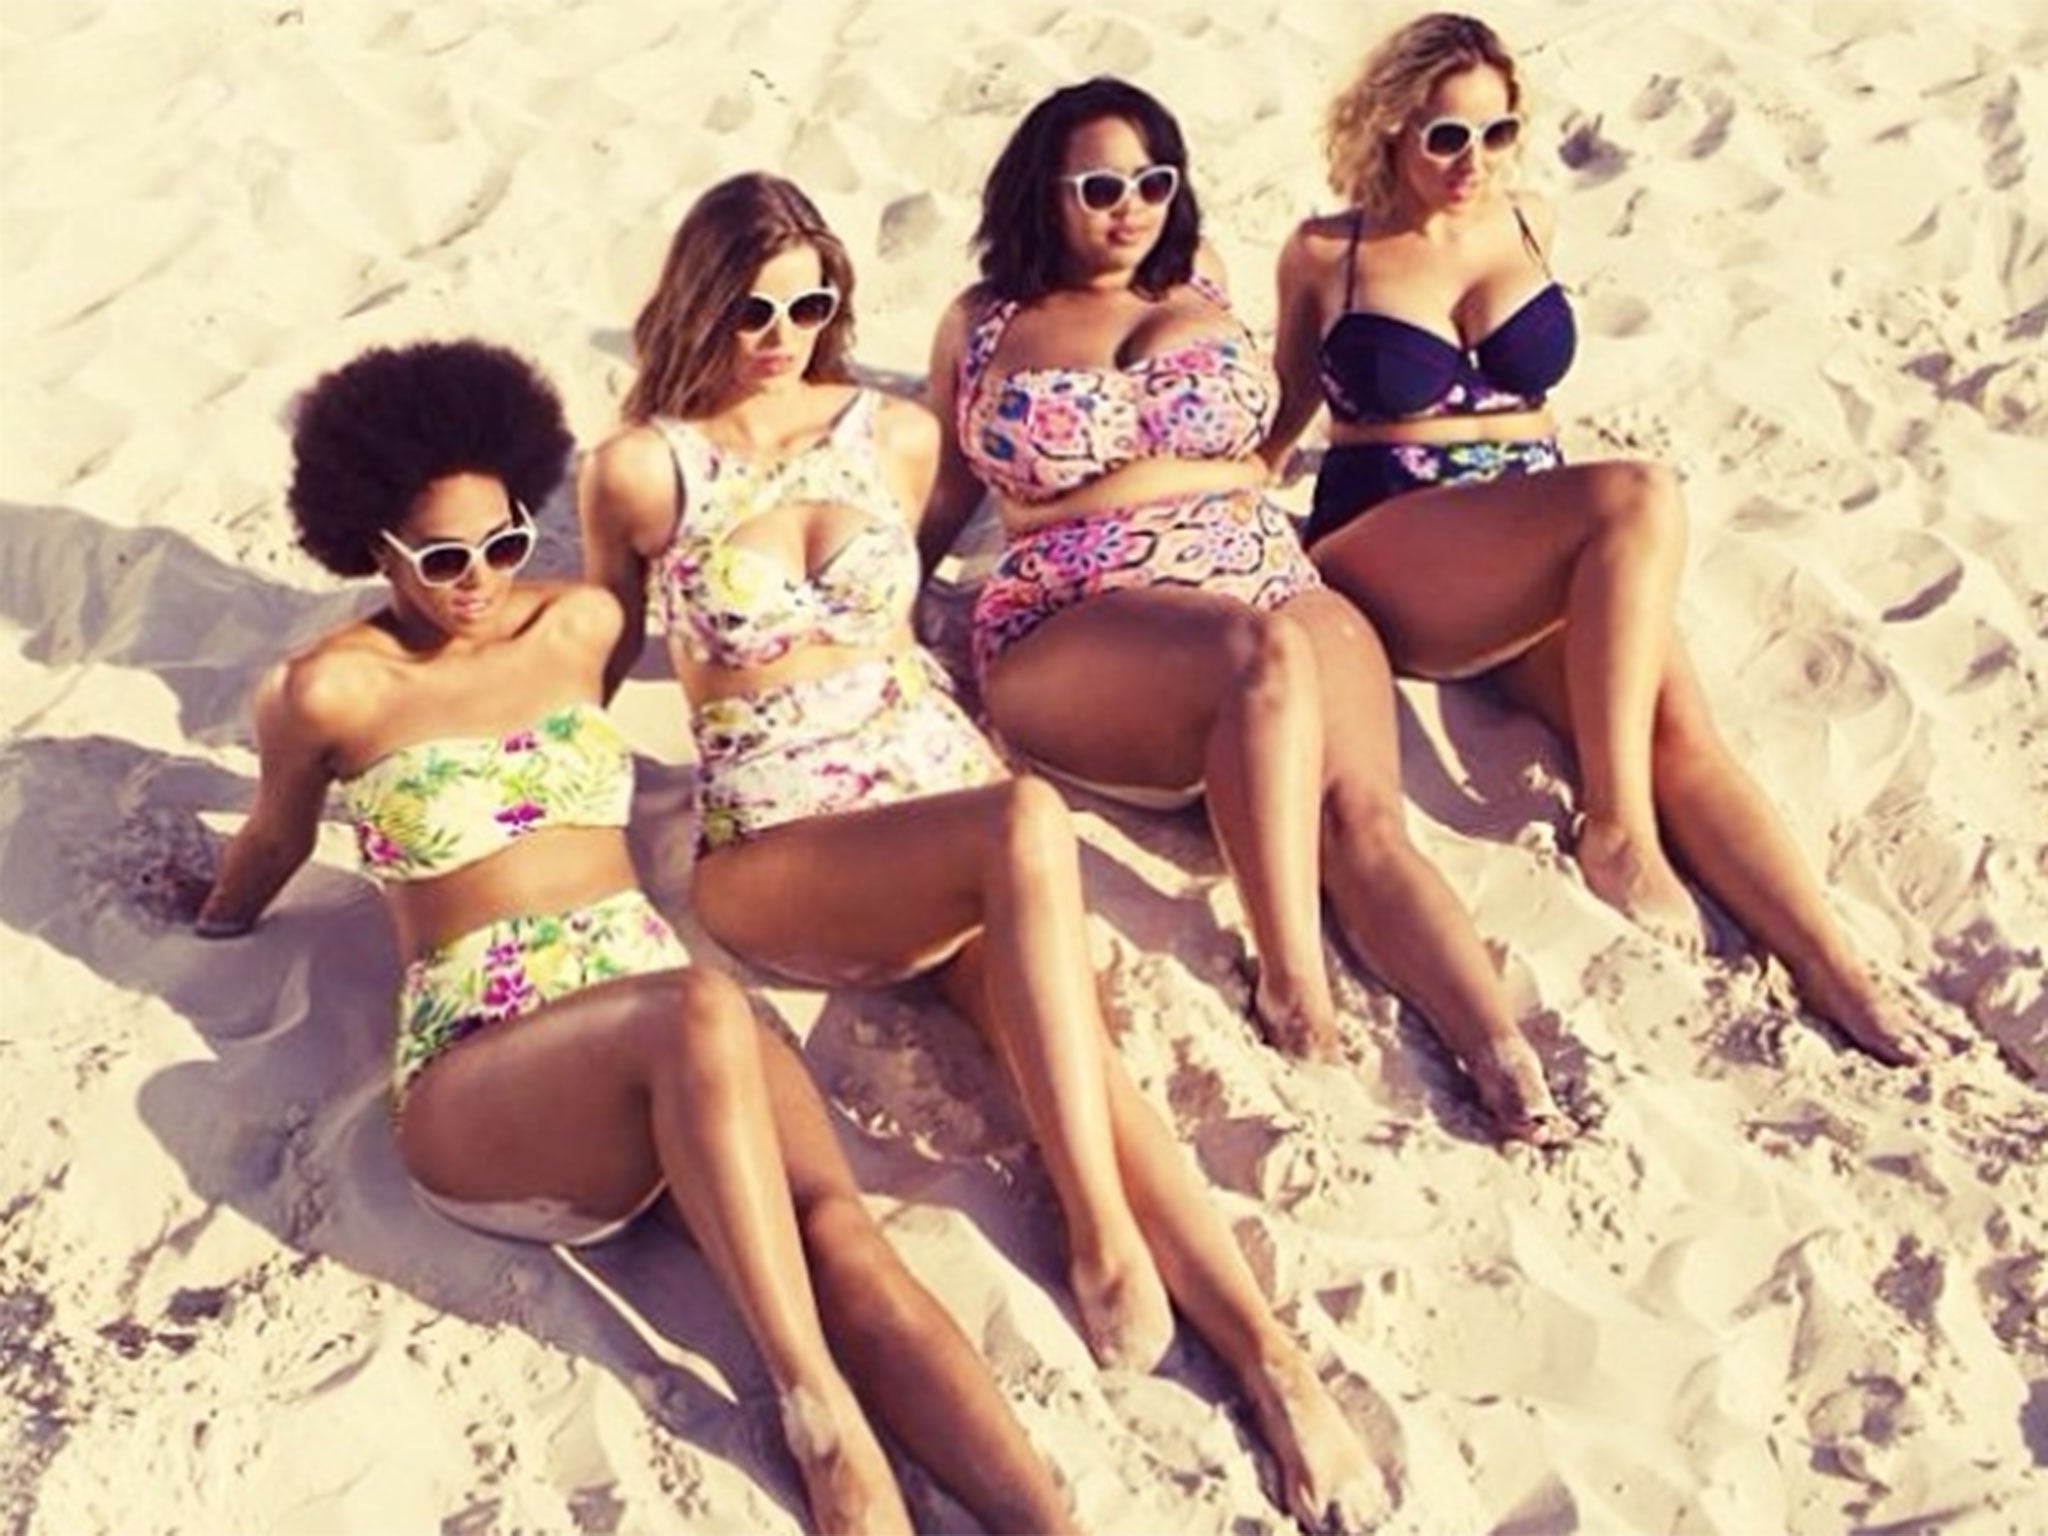 Fatkini hashtag encourages women to share pictures of their real bodies on social media image